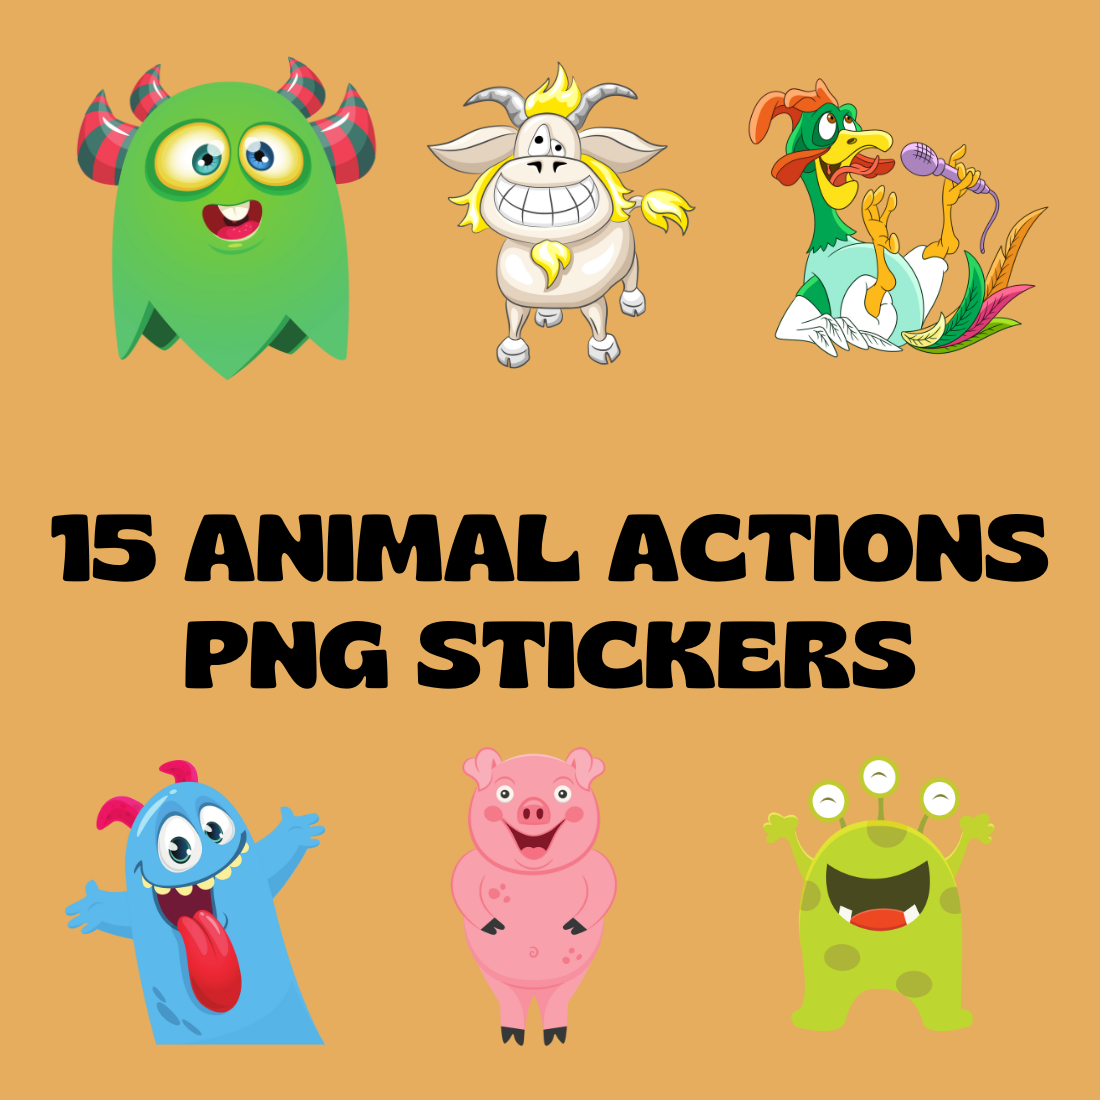 Best Animal Actions PNG Graphic Stickers cover image.